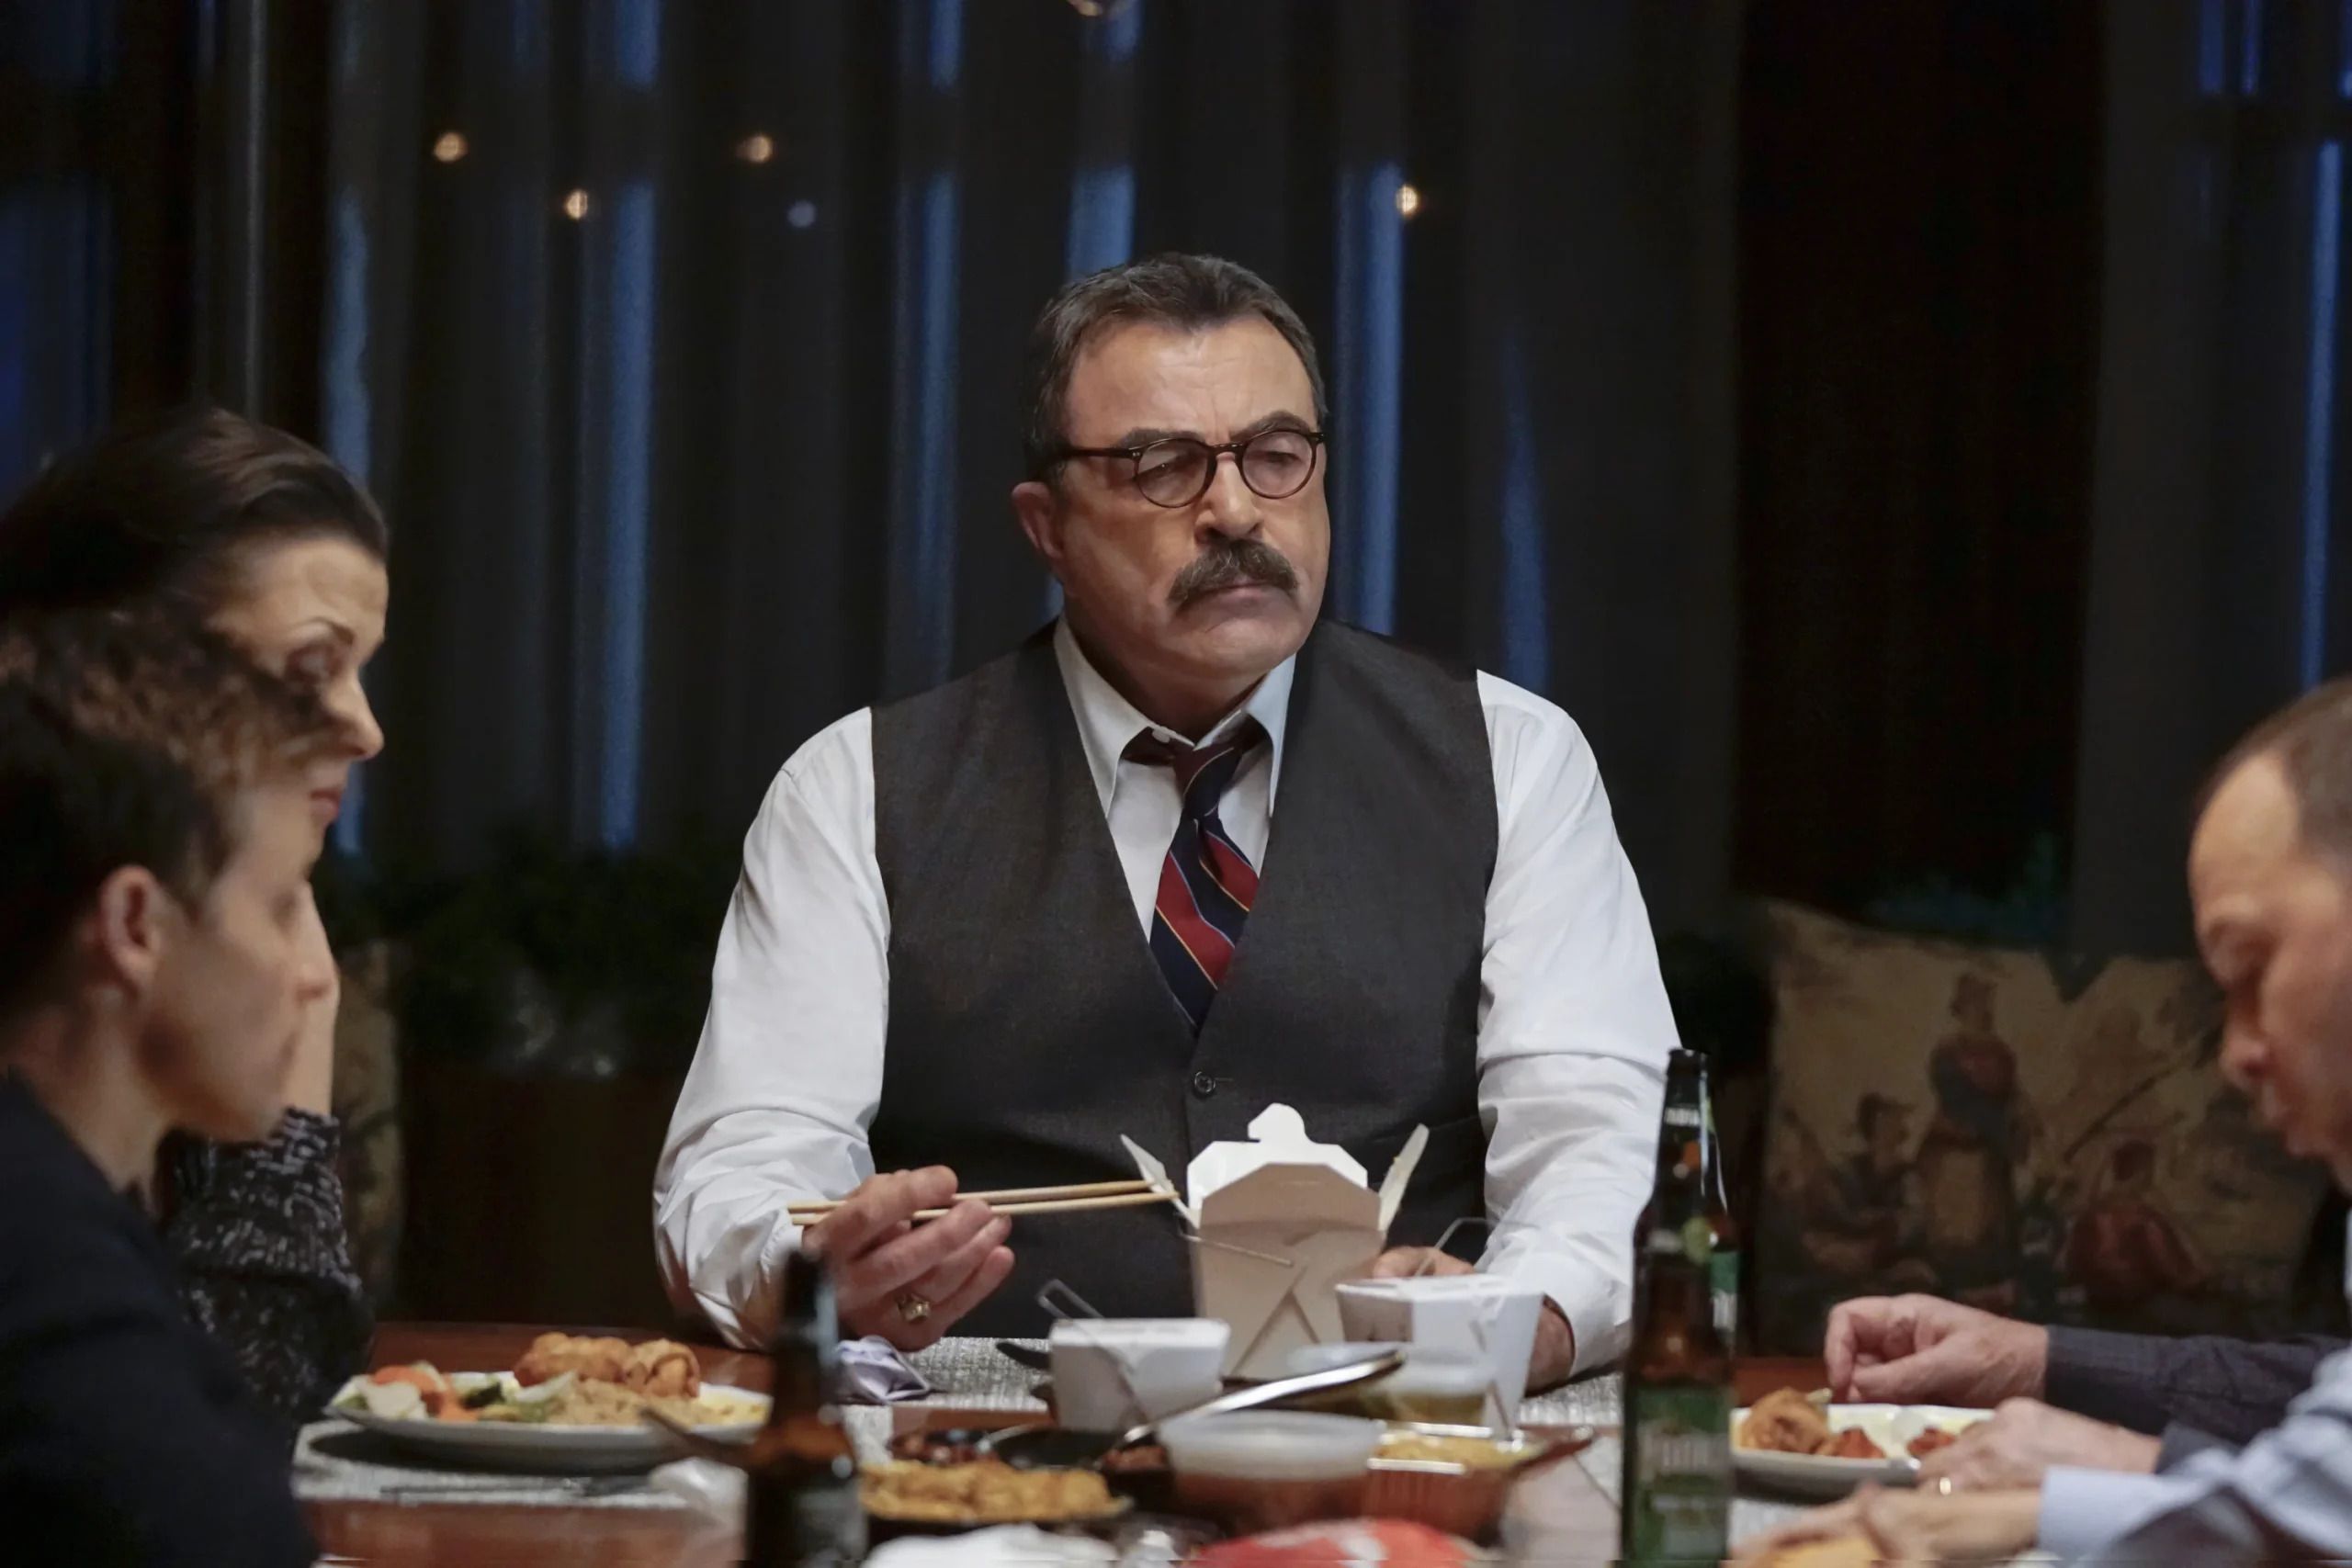 Frank Reagan sits at the dinner table in Blue Bloods